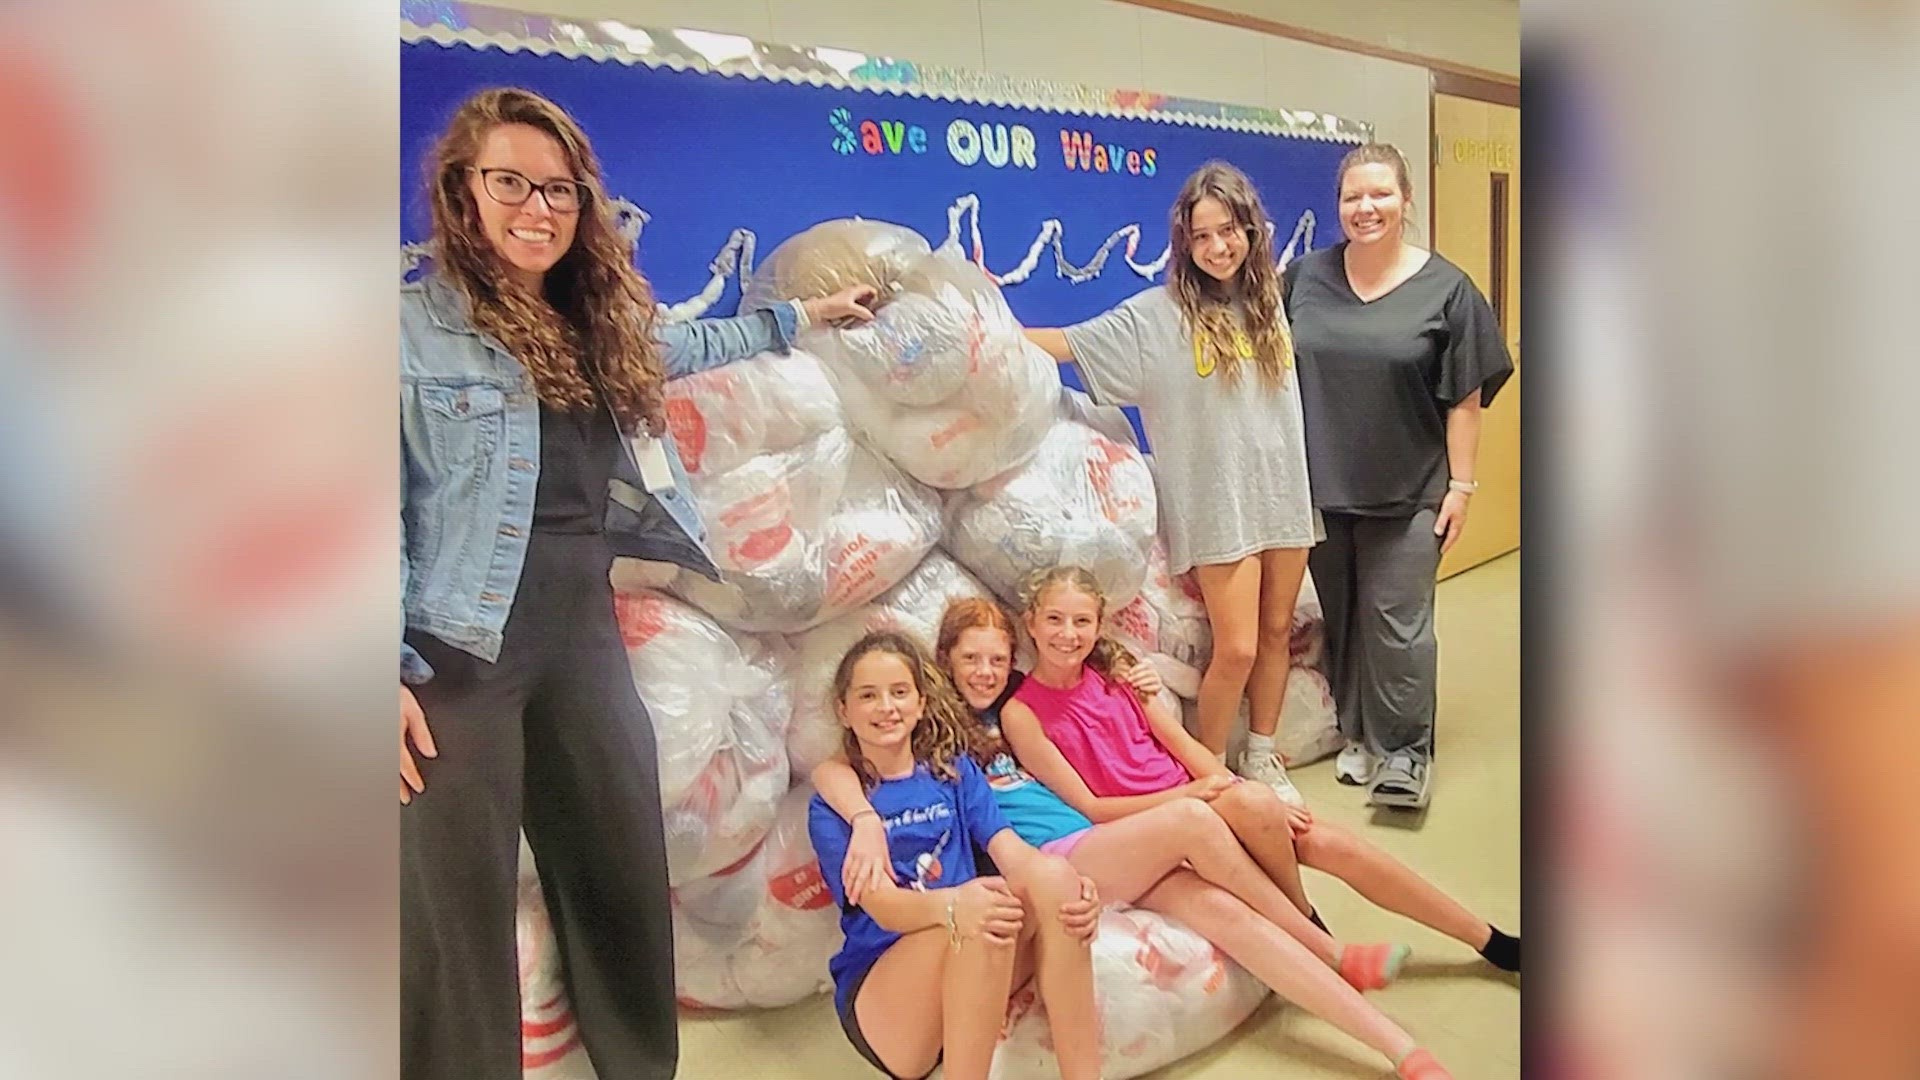 Teens Give Back organization makes mats out of plastic grocery bags for homeless residents